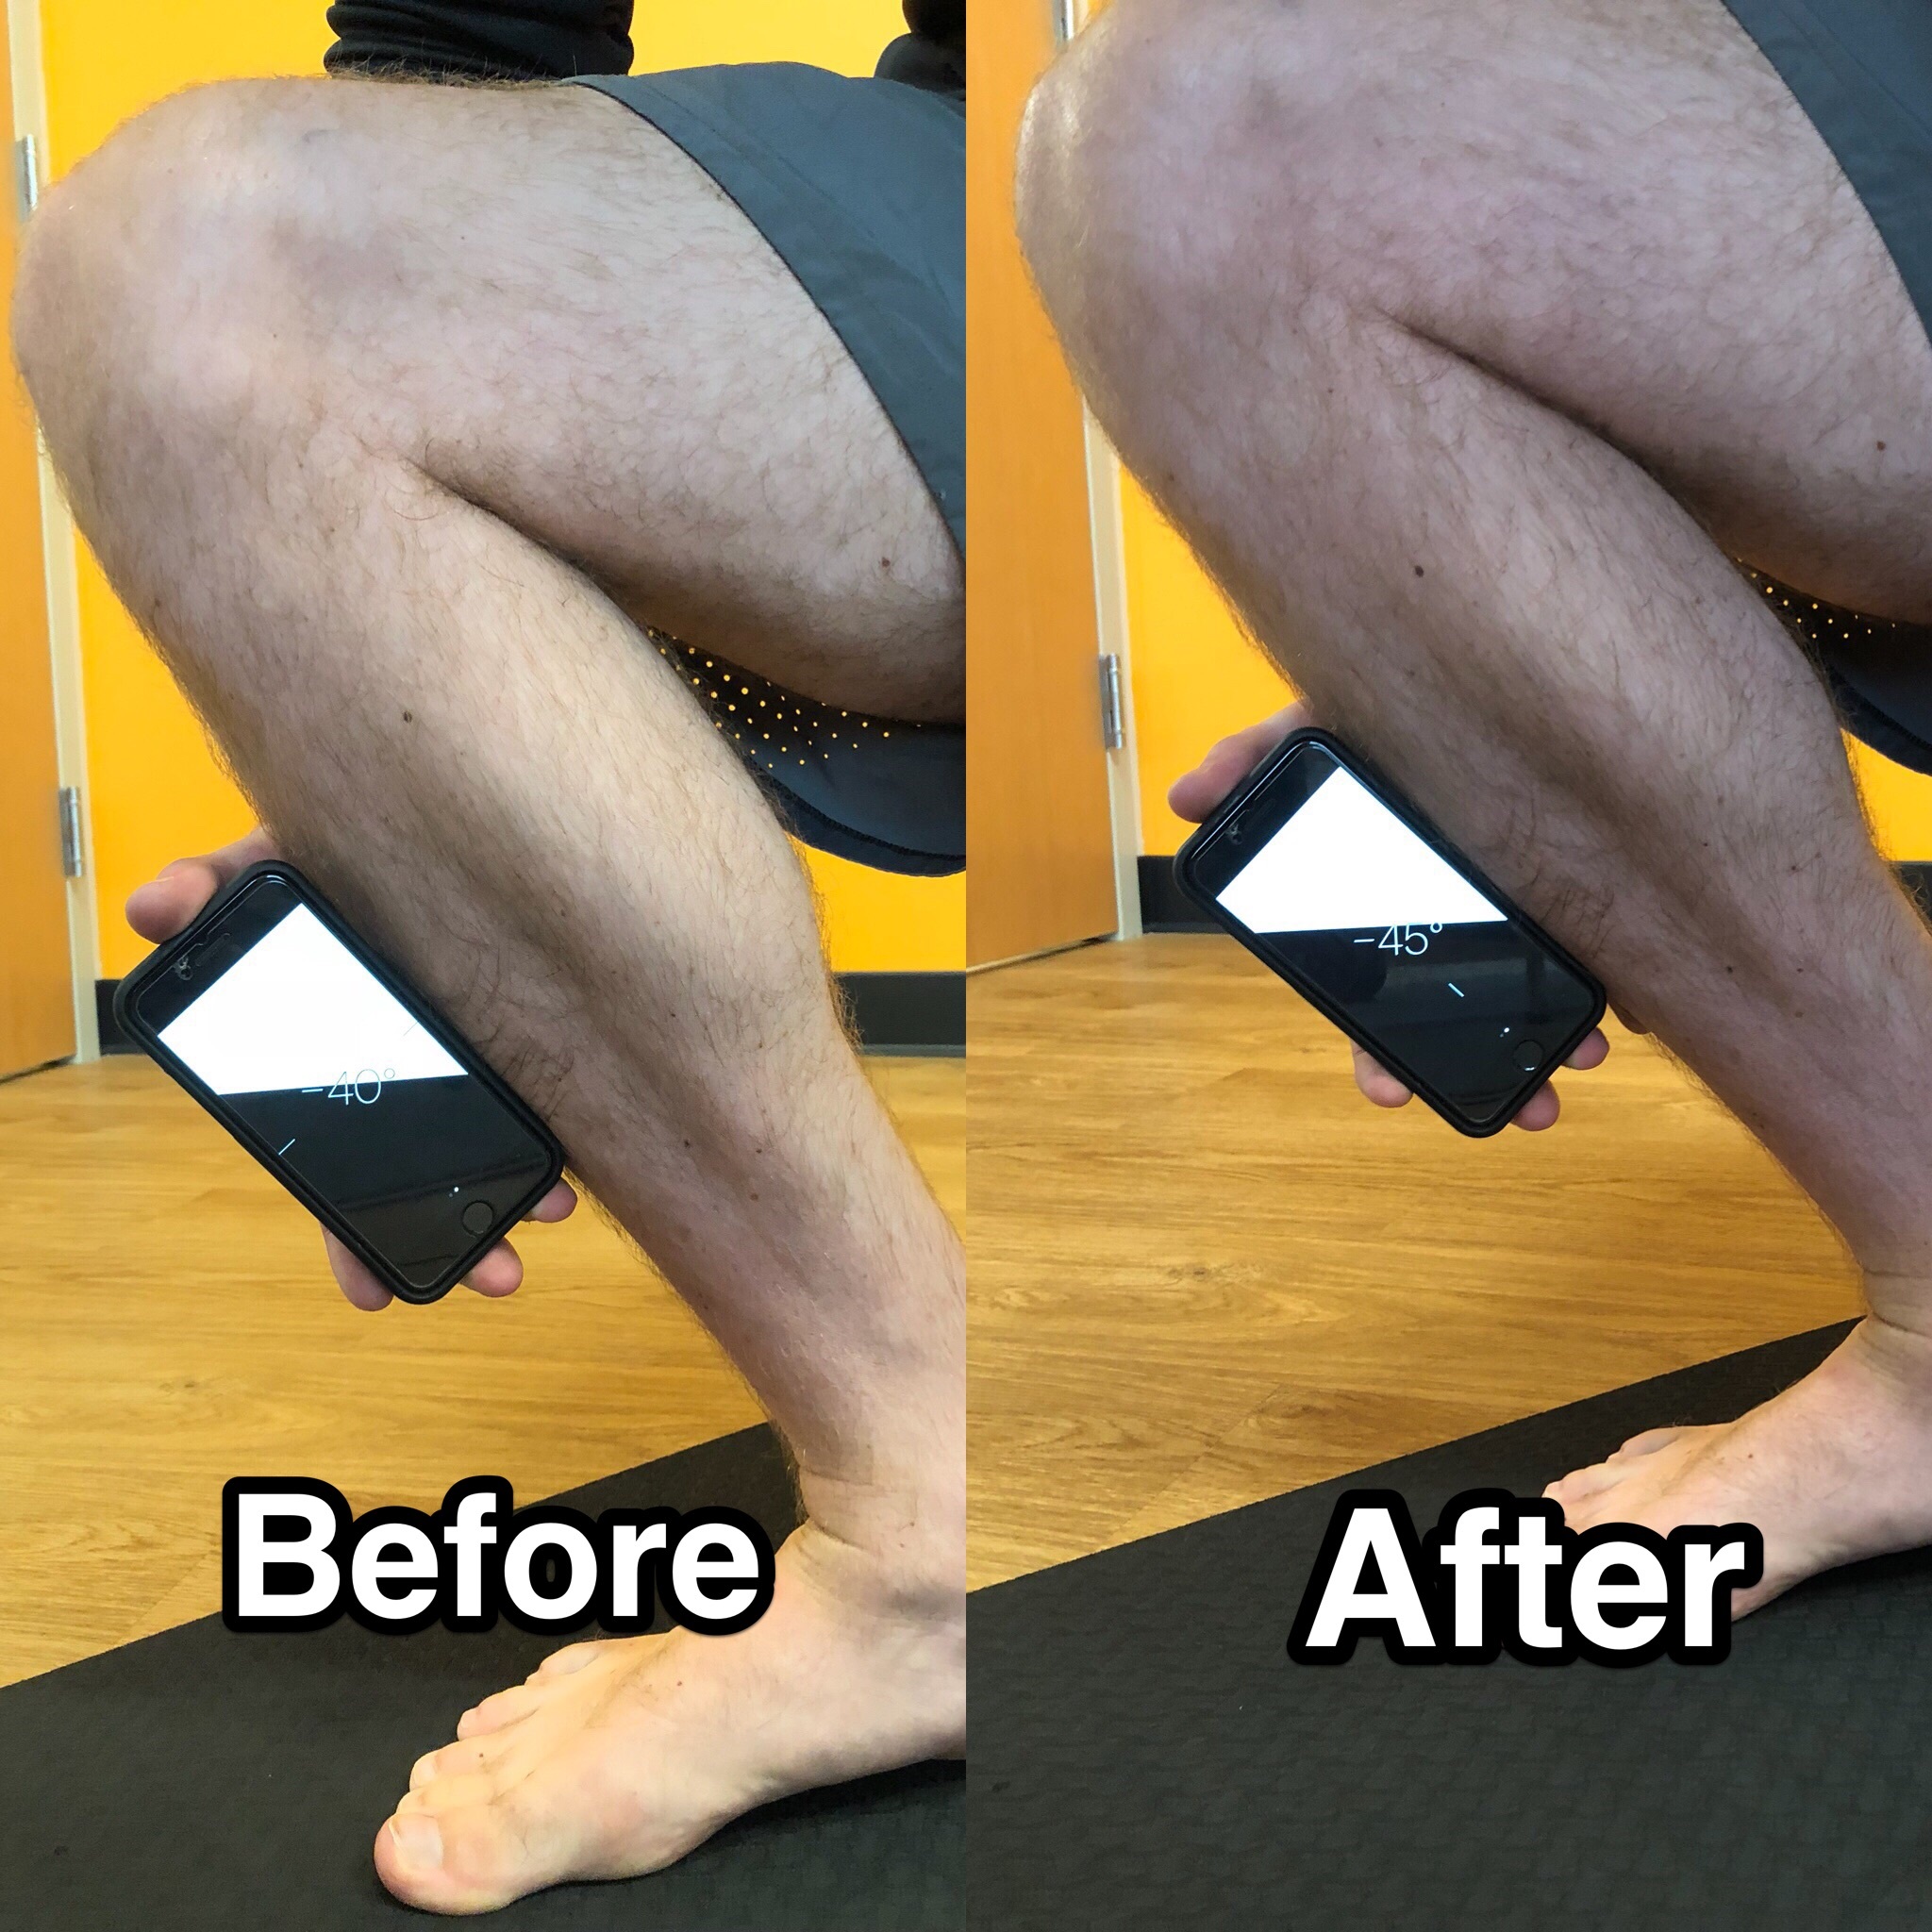 How to Improve Ankle Dorsiflexion Fewer Injuries and Better Performance —  Evolve Performance Healthcare, Molalla Chiropractor